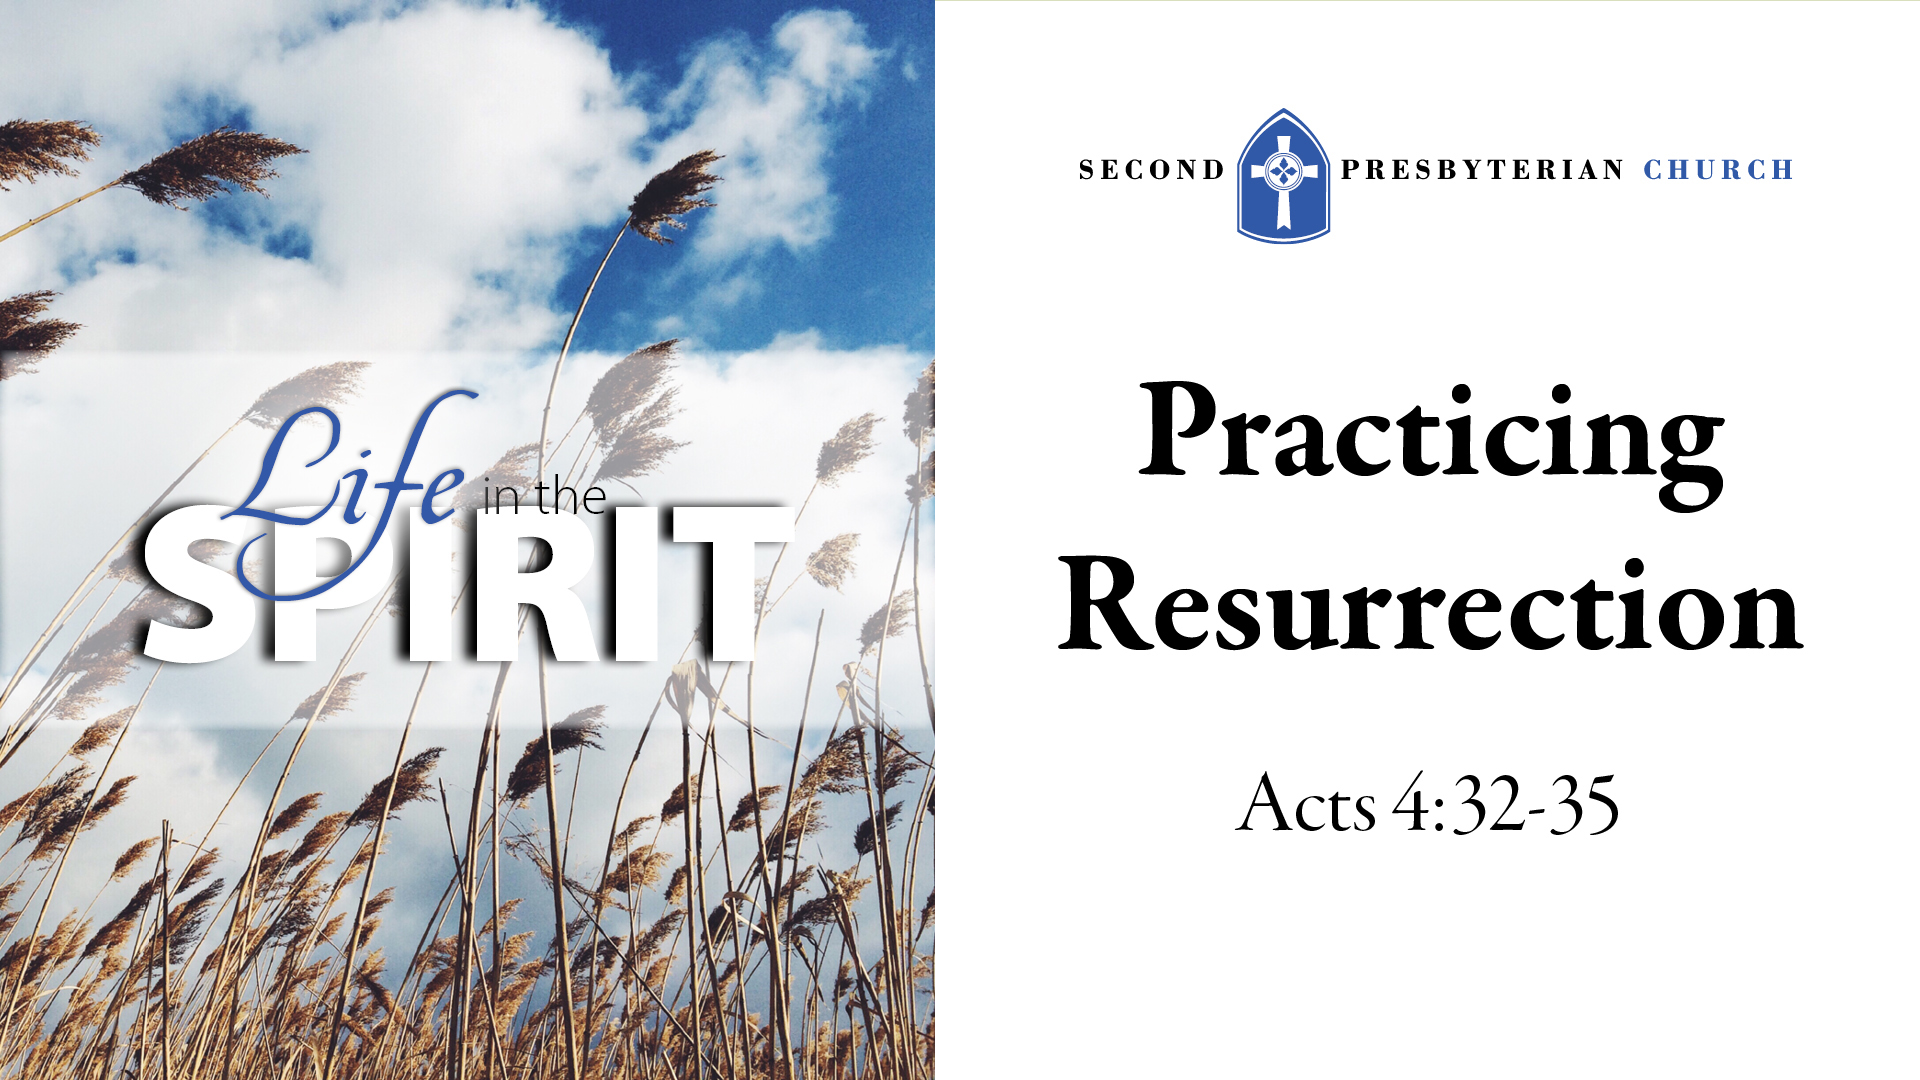 Life in the Spirit-Practicing Resurrection